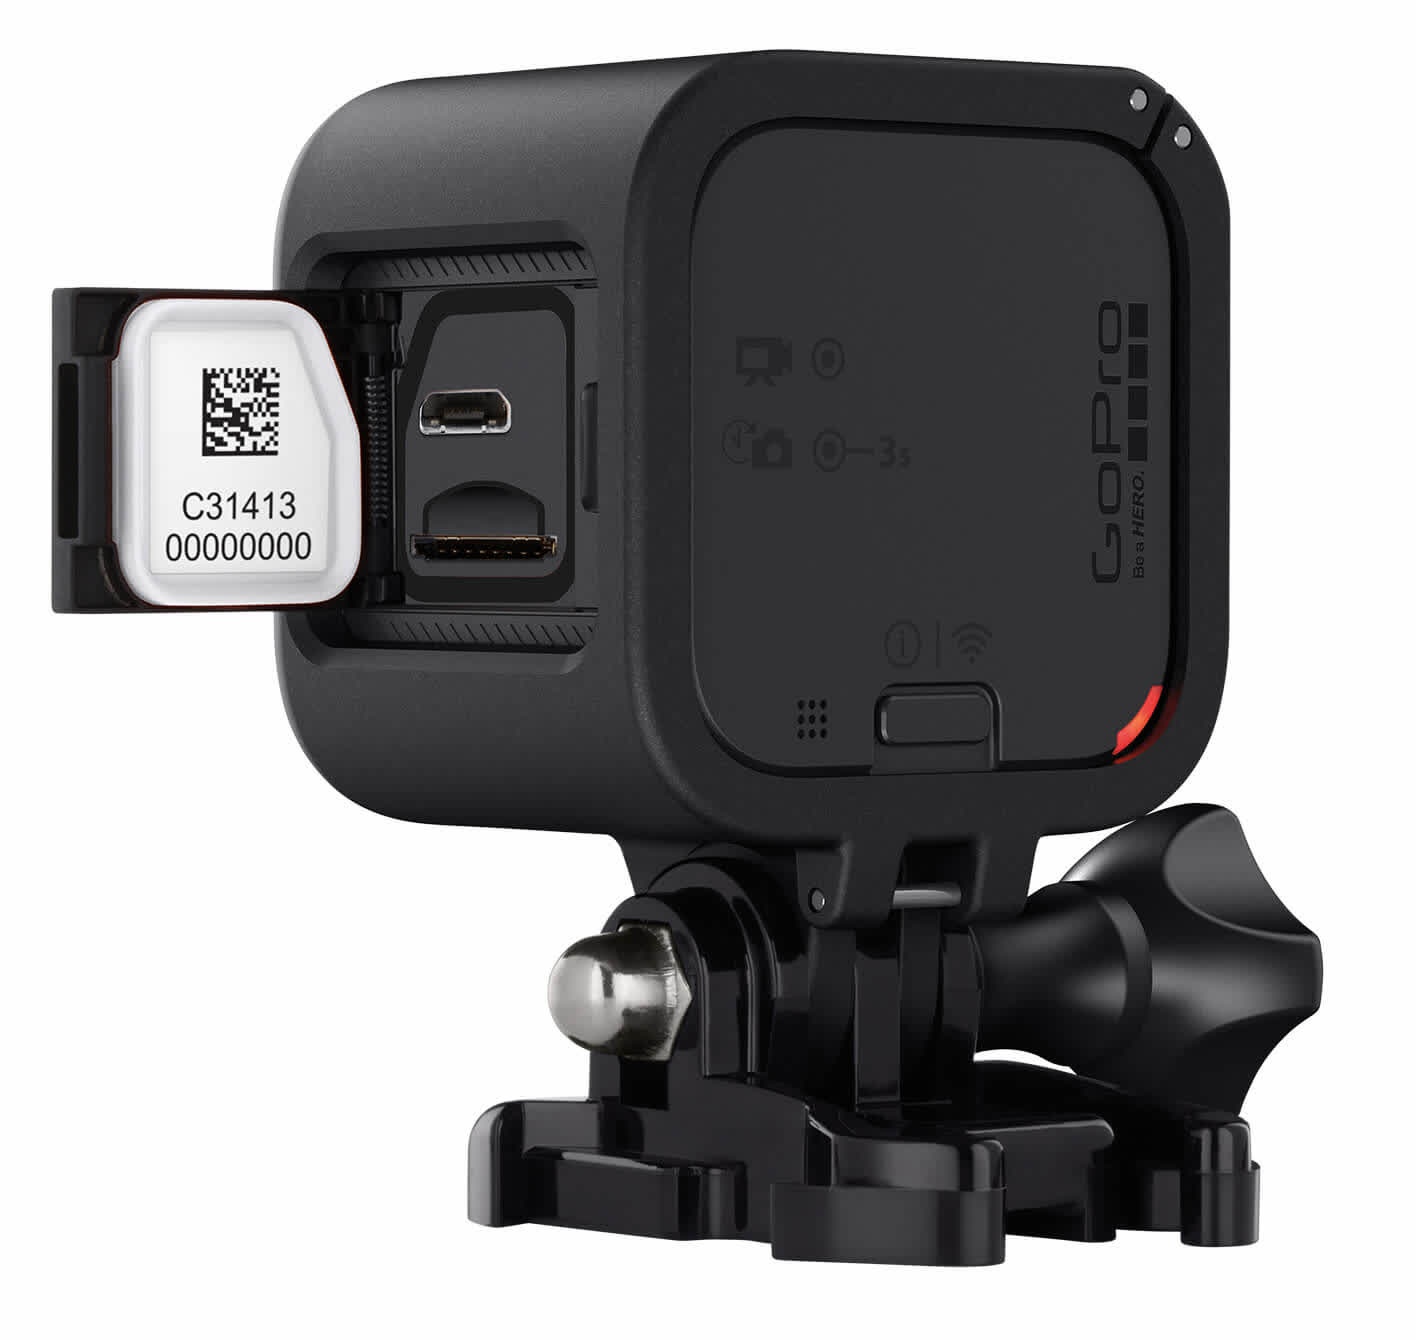 GoPro Hero 4 Session Reviews, Pros and Cons | TechSpot